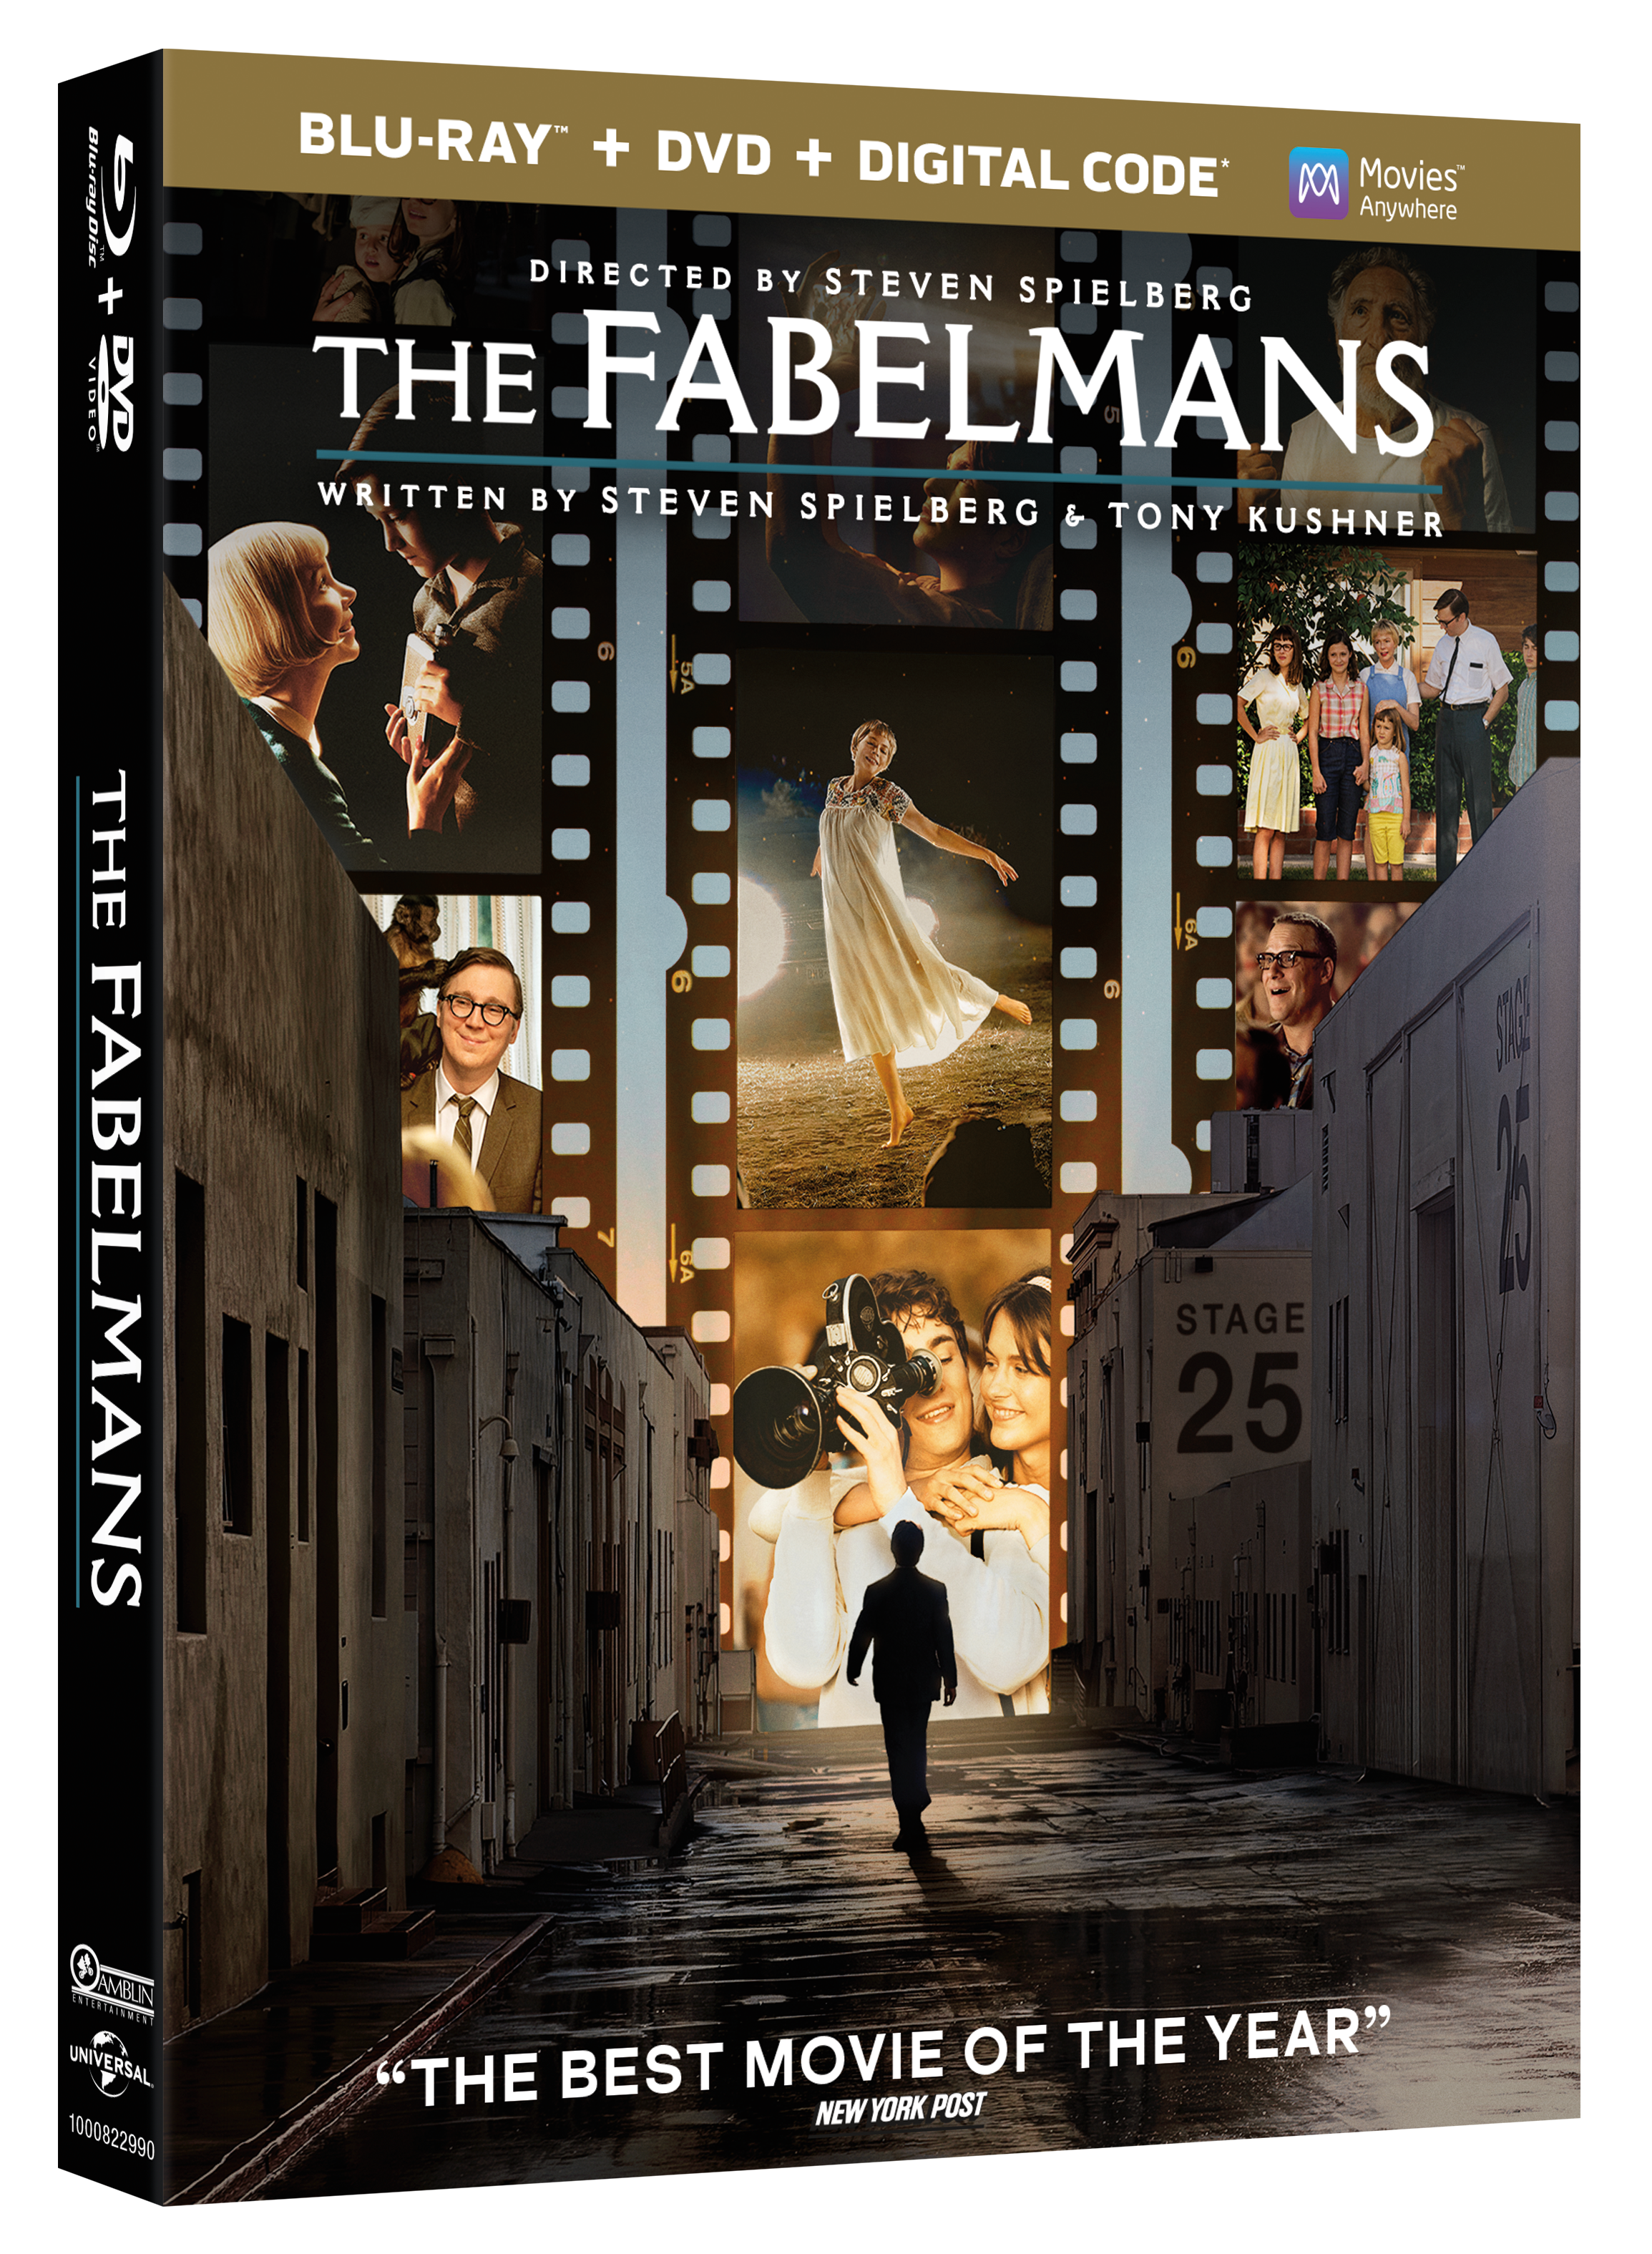 The Fabelmans comes to Blu-ray